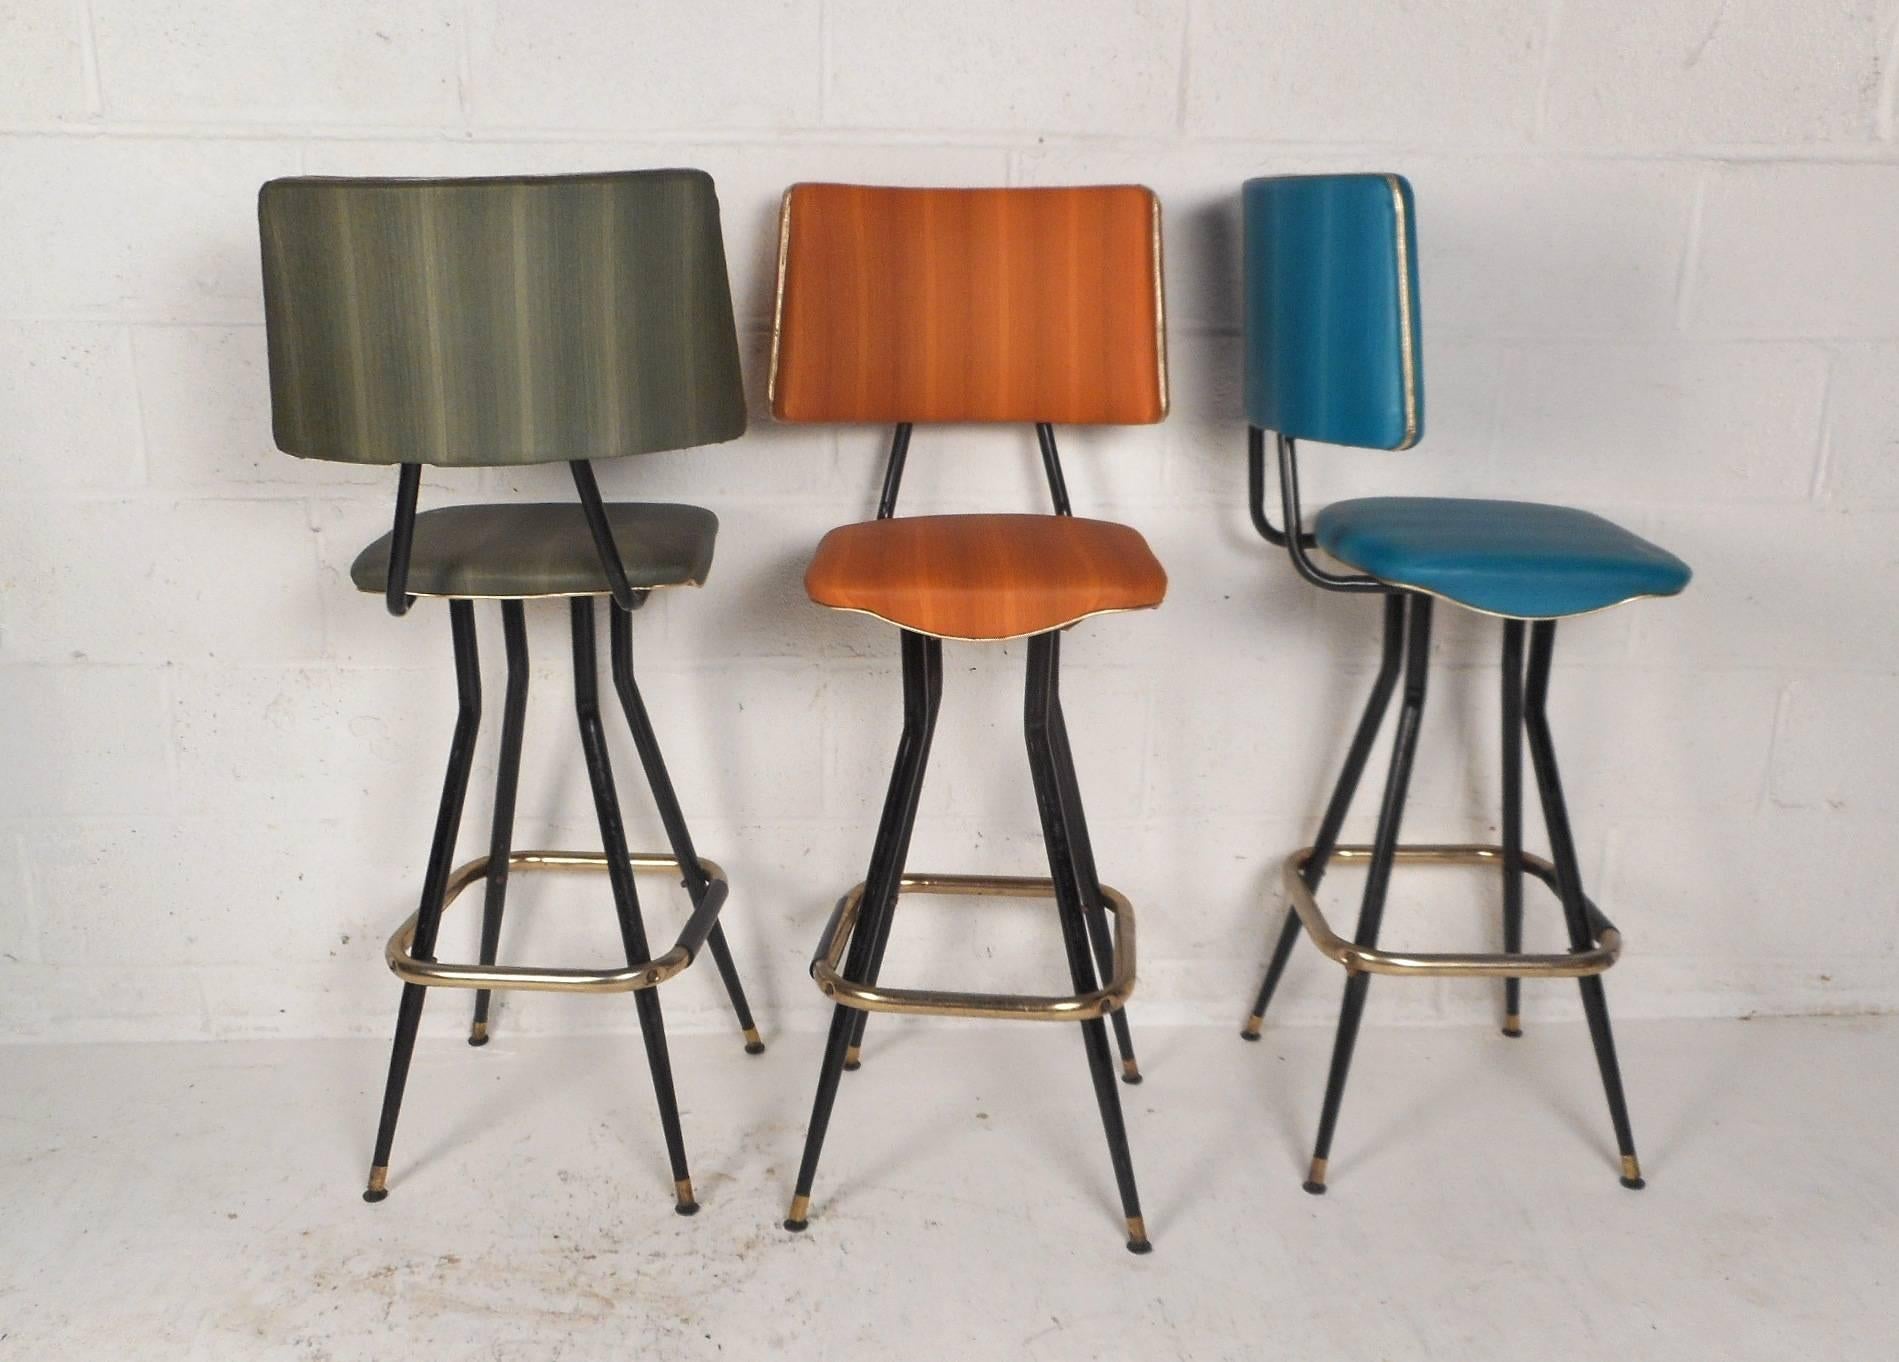 This stylish vintage modern set of five bar stools feature different colored upholstery on each one. Thick padded back rests and seats with perfect contours ensure maximum comfort within any seating arrangement. Sturdy bent rod metal frames with a